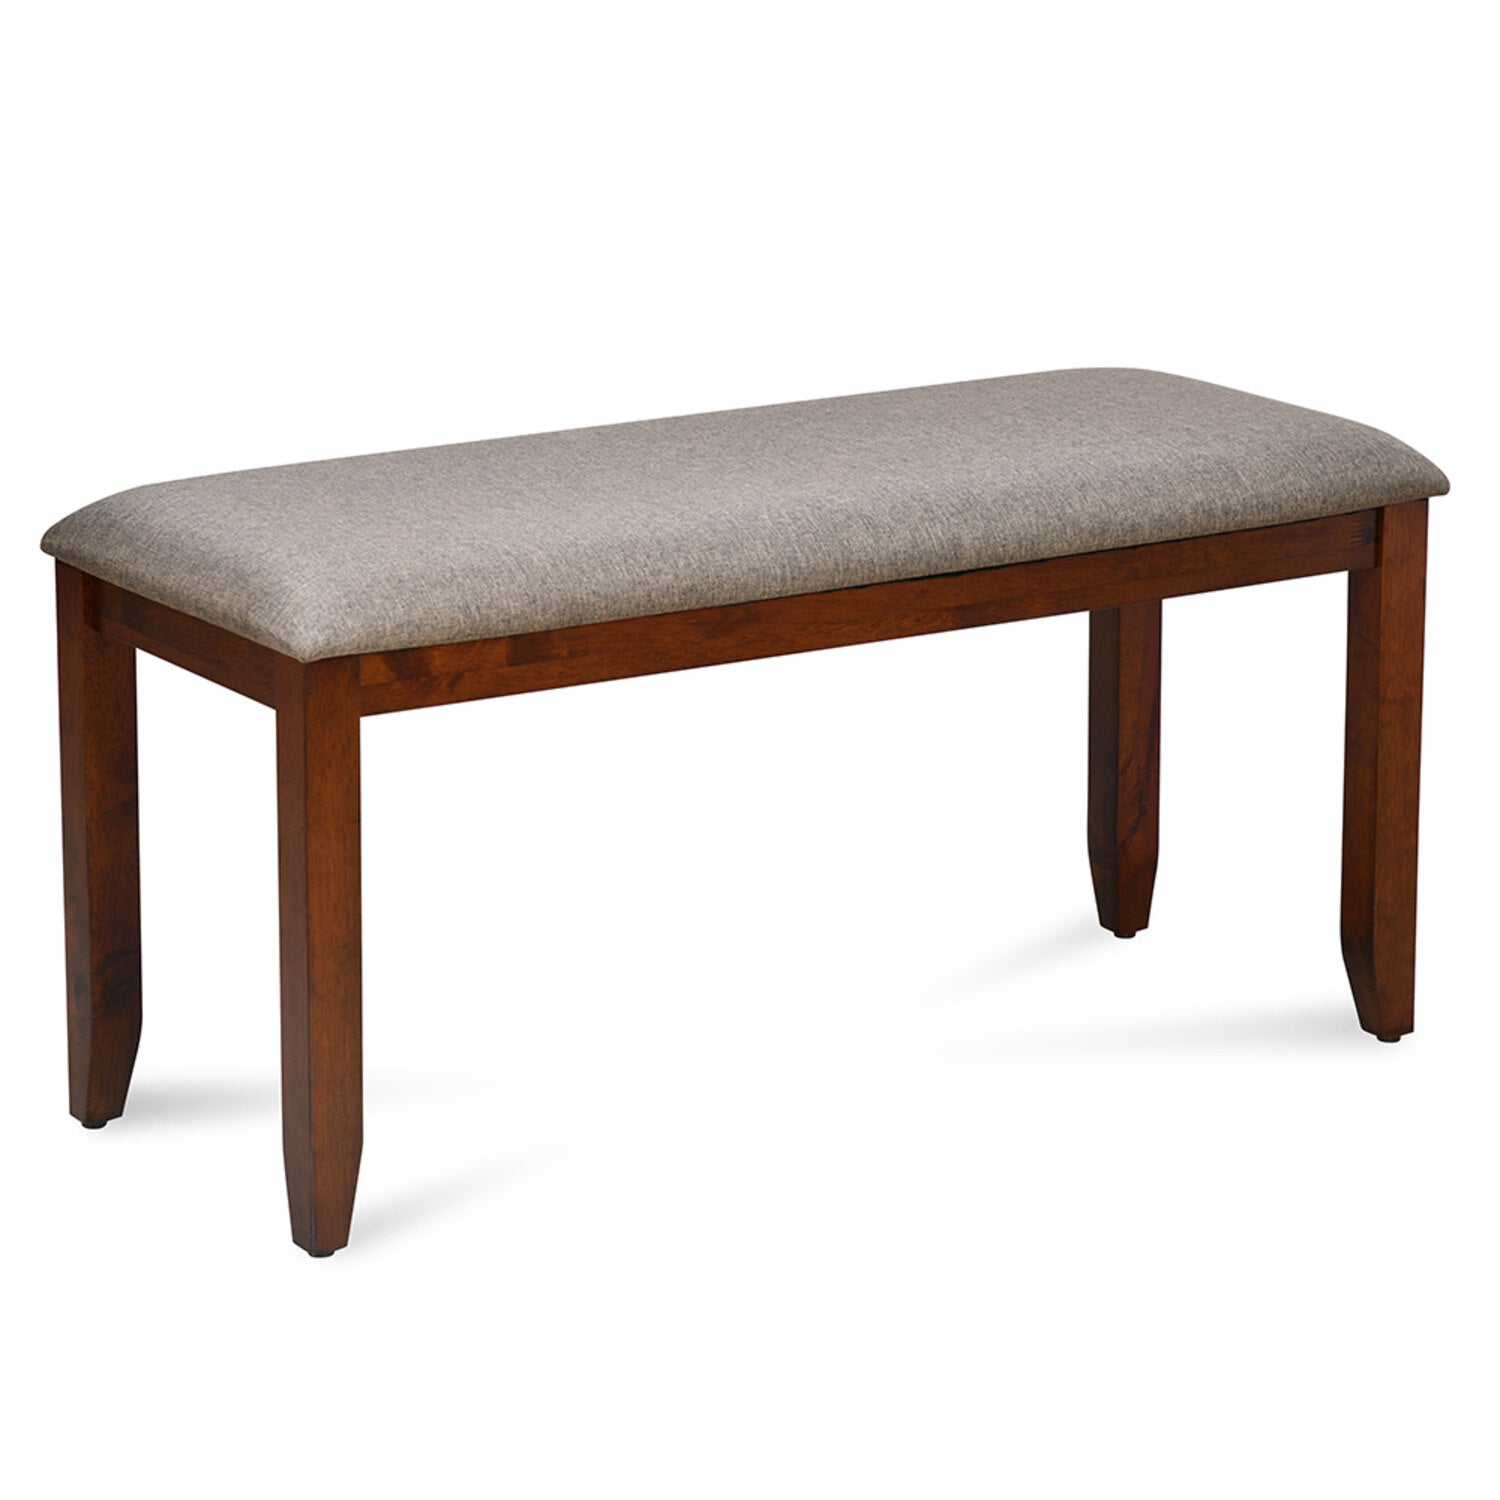 Navin 6 Seater Dining Bench (Brown)